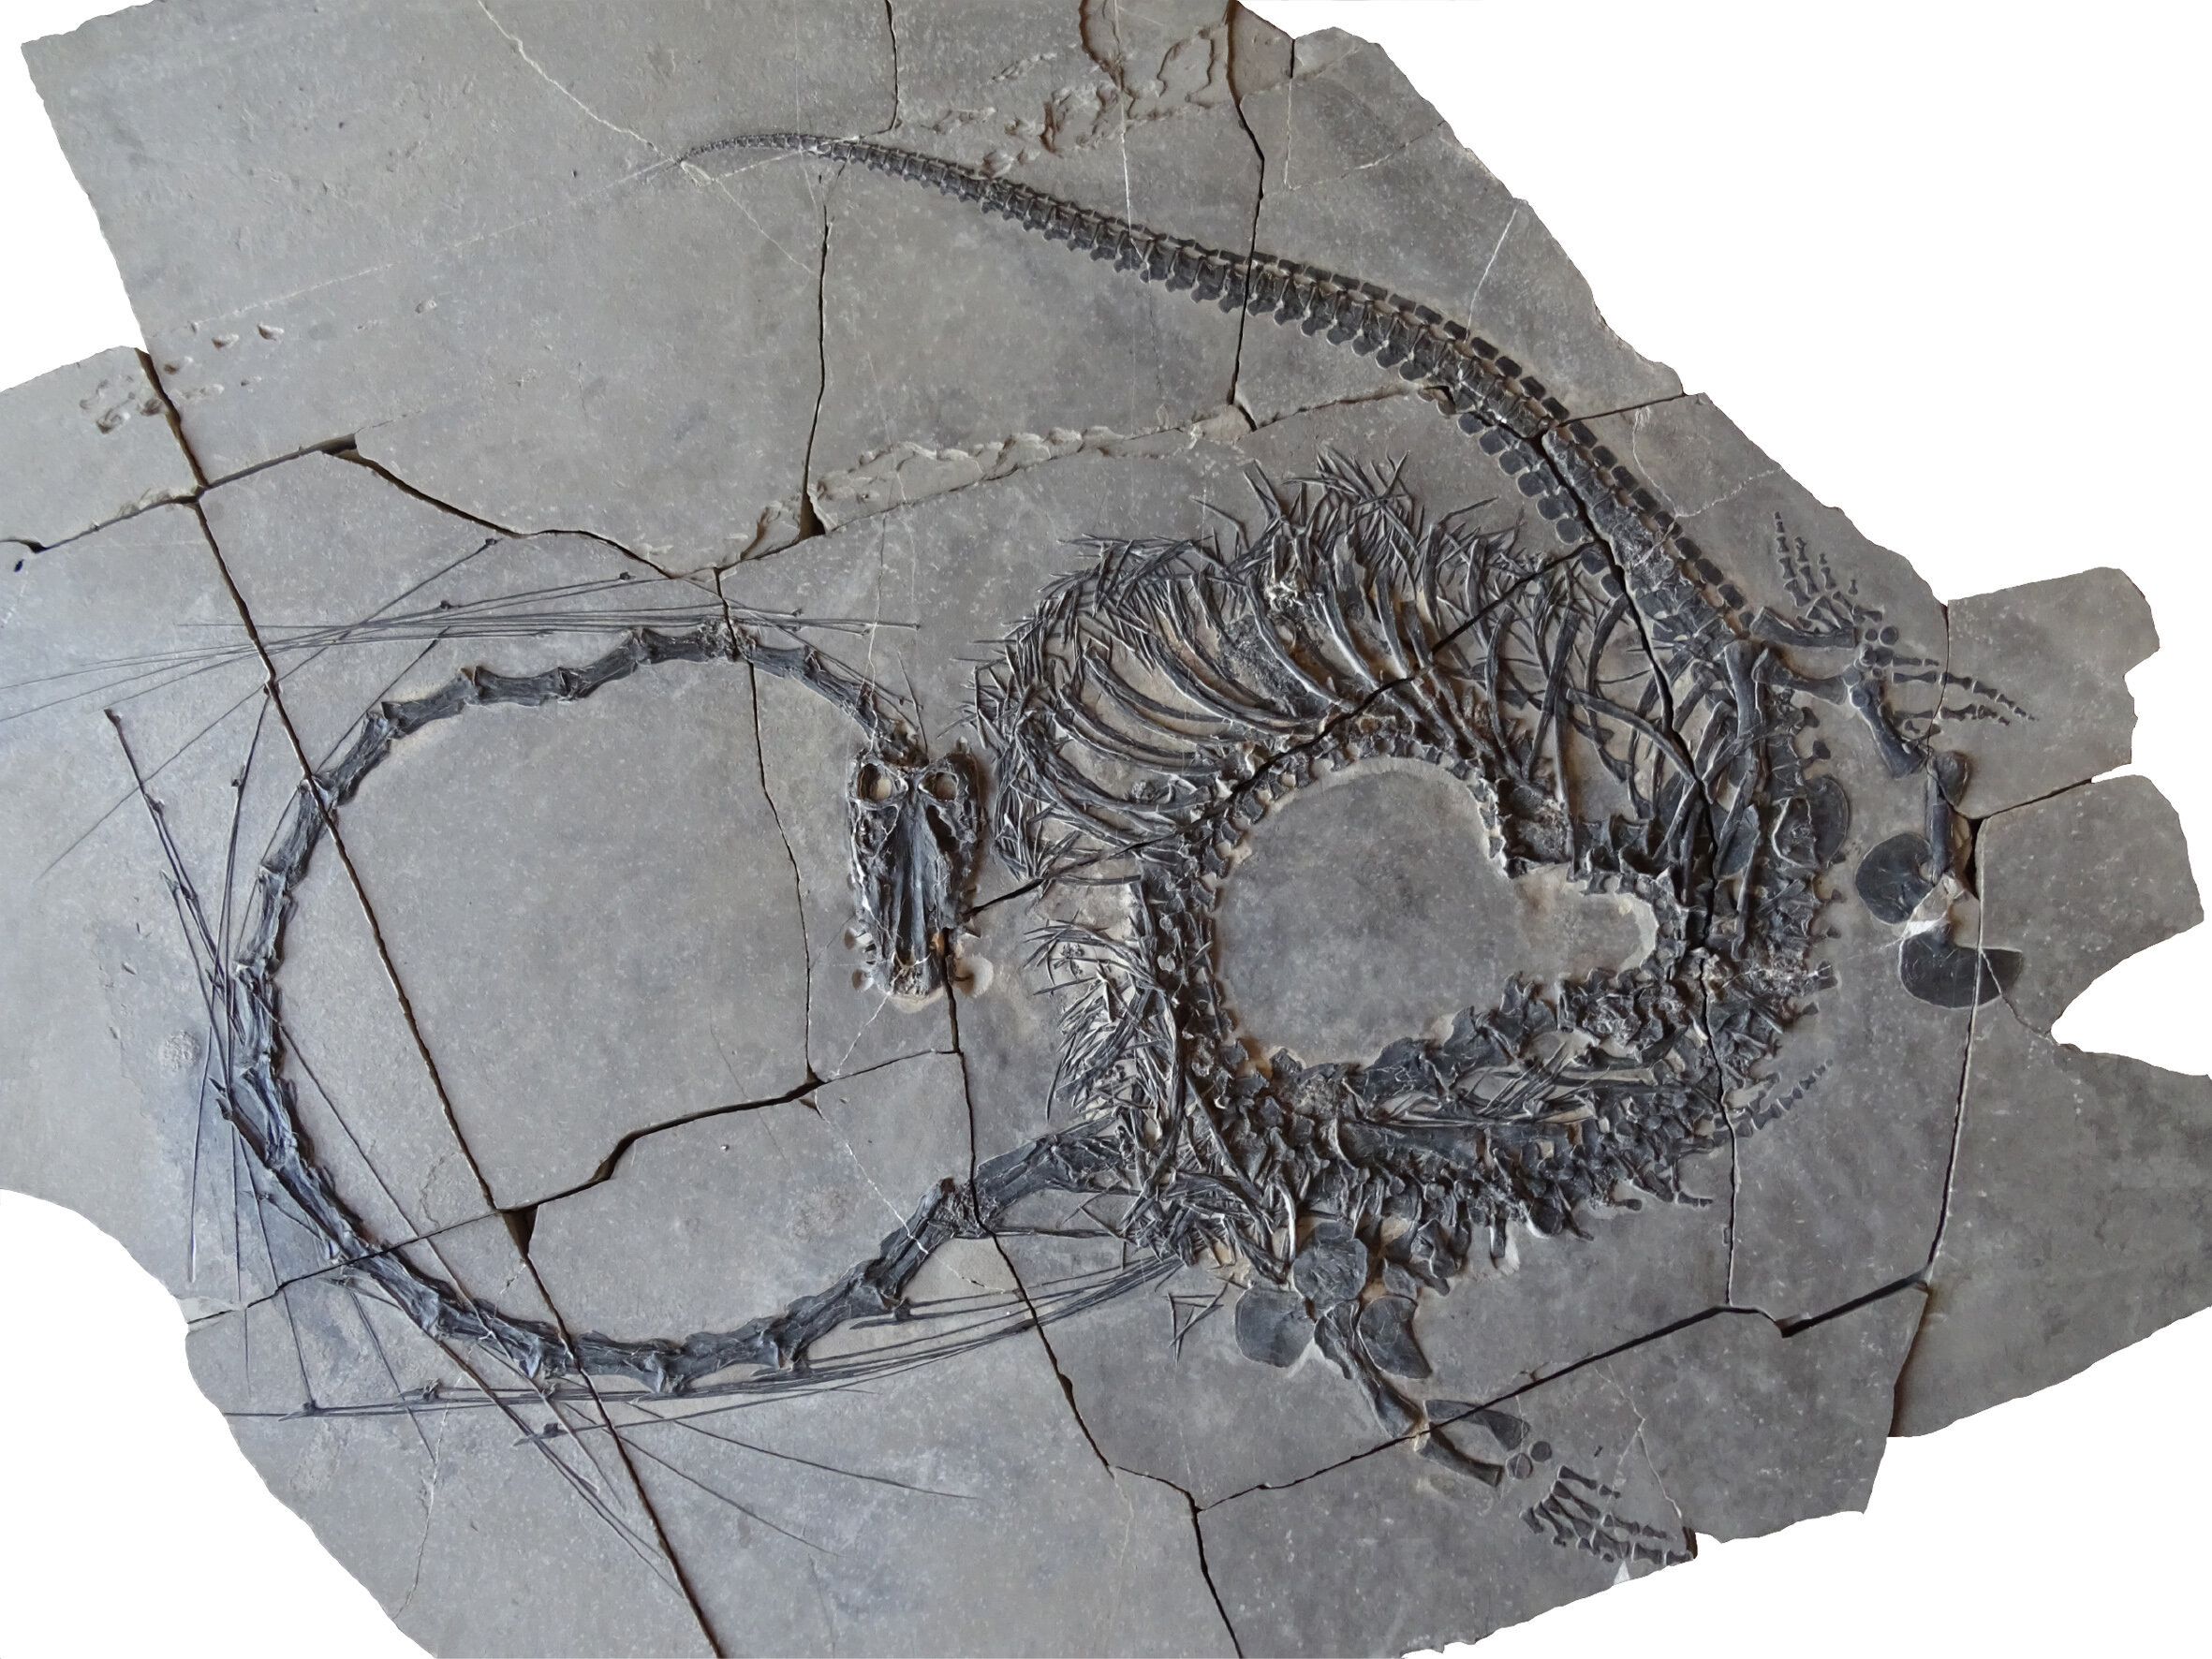 Paleontologists discover a 240-million-year-old 'Chinese dragon'